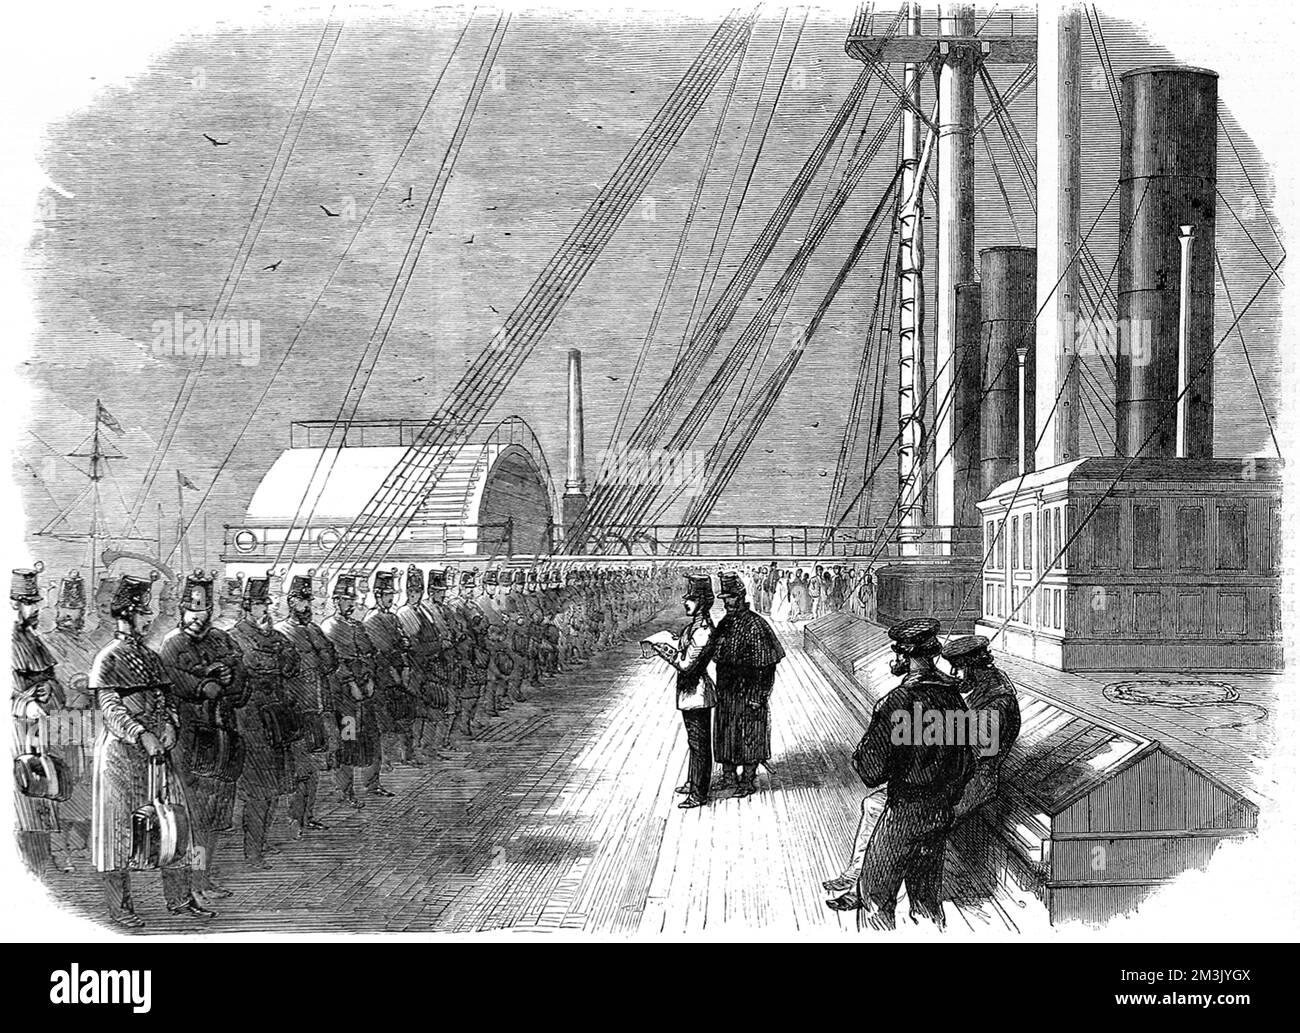 Ranks of troops onboard the ship the 'Great Eastern', capable of carrying 10,000 men. The troops were making their way to North America to reinforce the British presence in Canada.  1861 Stock Photo